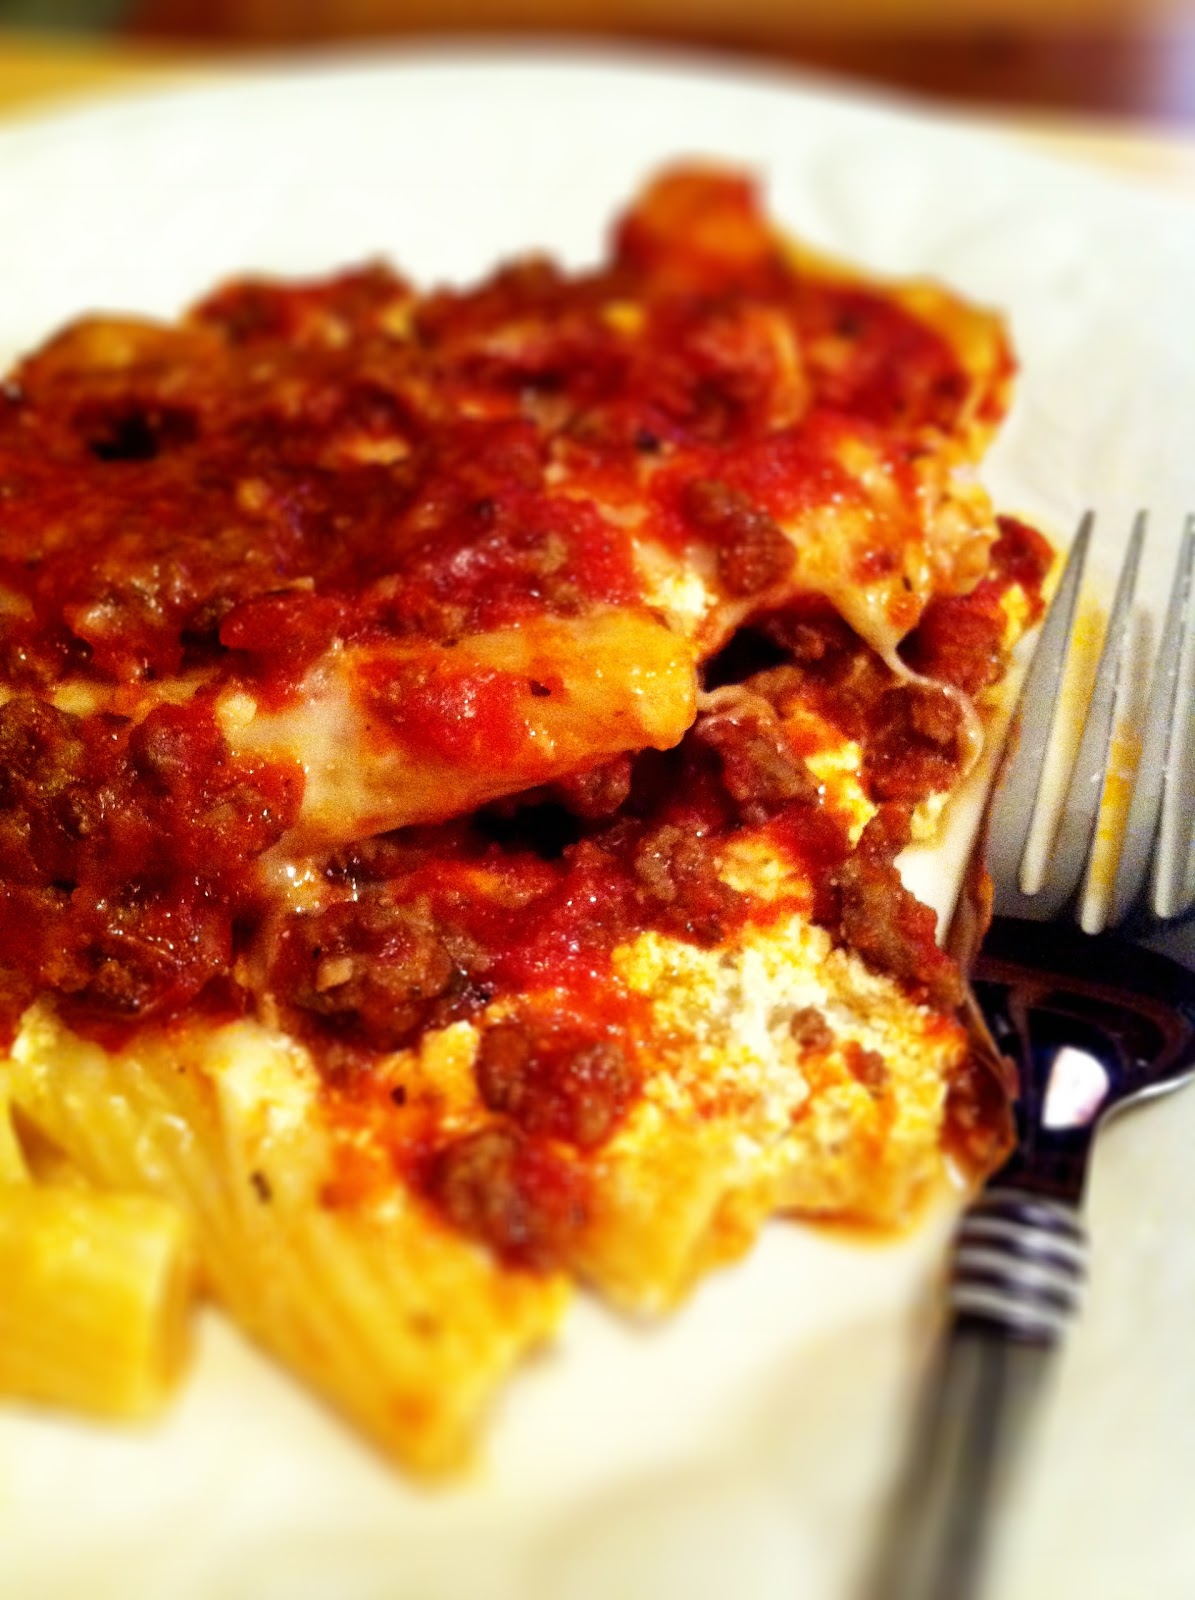 Sowell Life: A new recipe: Baked Ziti